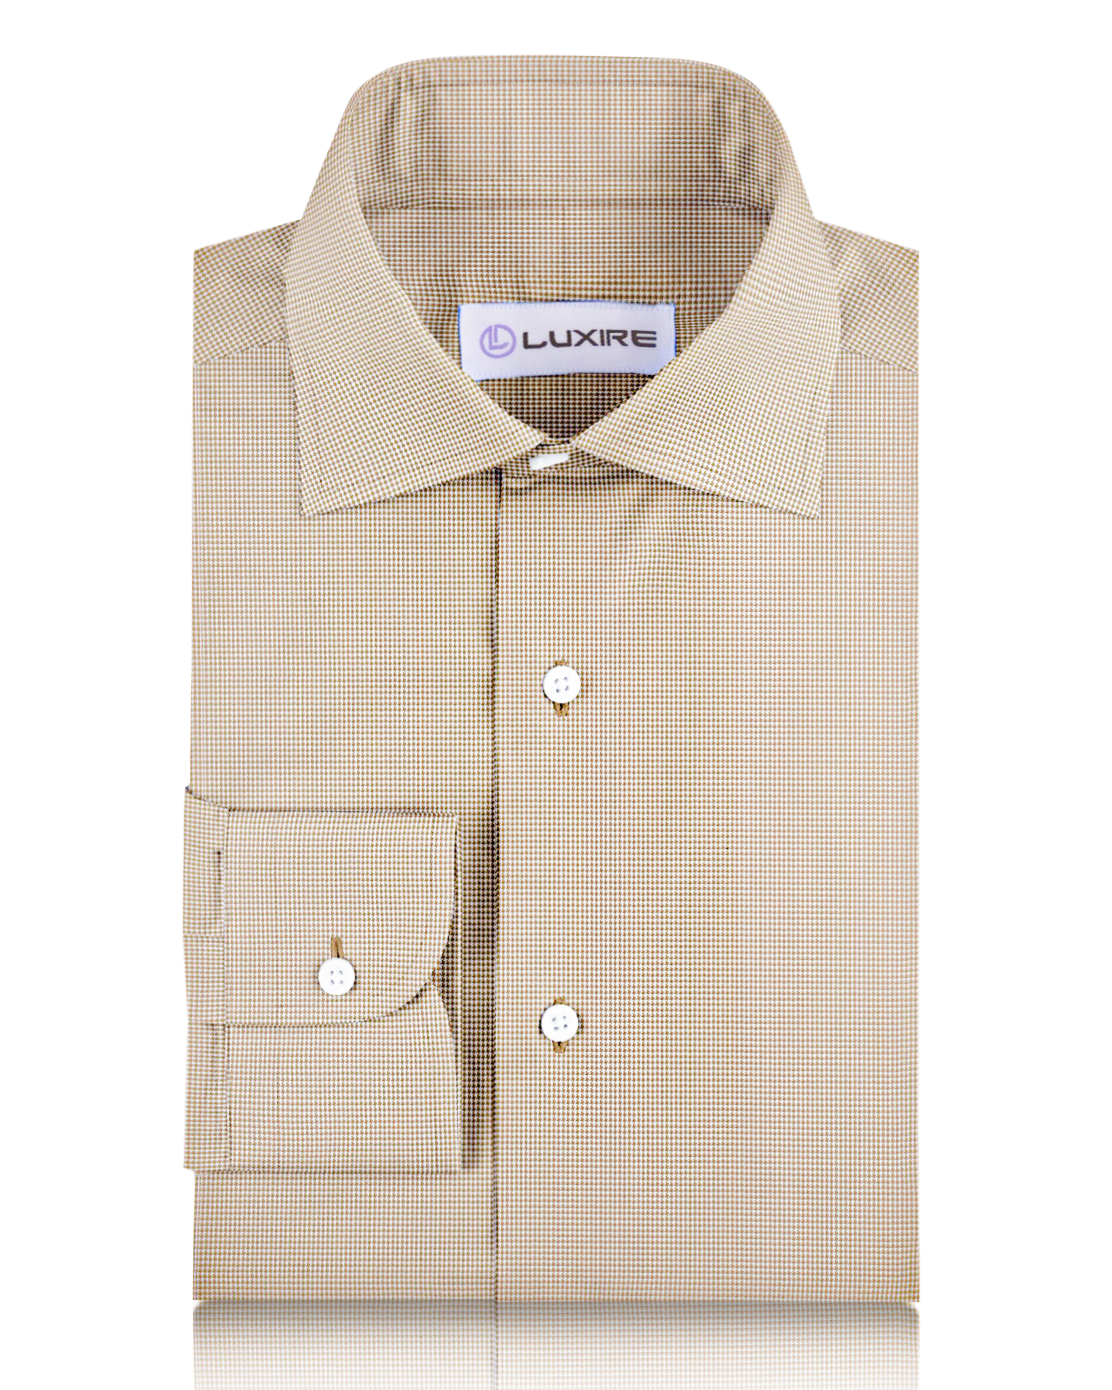 Front of the custom linen shirt for men in light brown with white checks by Luxire Clothing